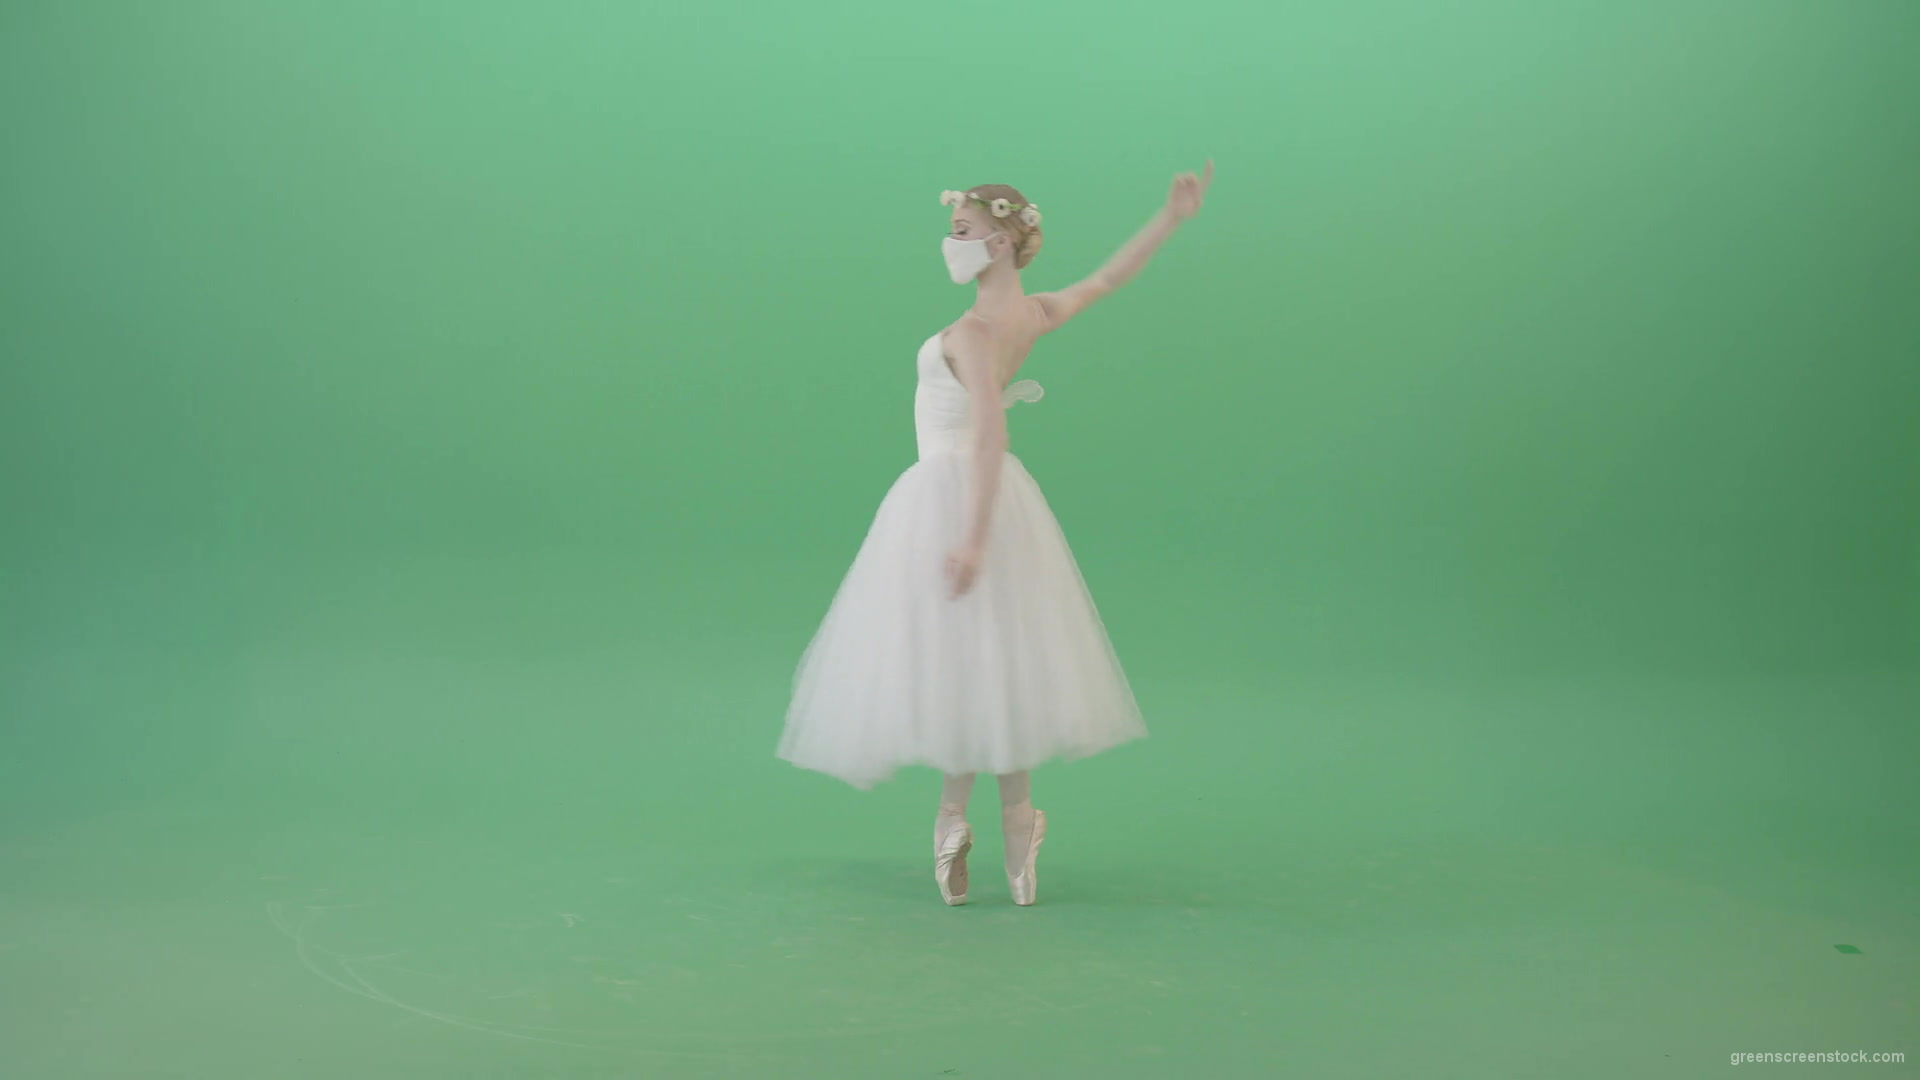 Ballet-Dance-young-woman-welcome-Corona-Virus-dancing-in-mask-isolated-on-green-screen-4K-Video-Footage-1920_004 Green Screen Stock